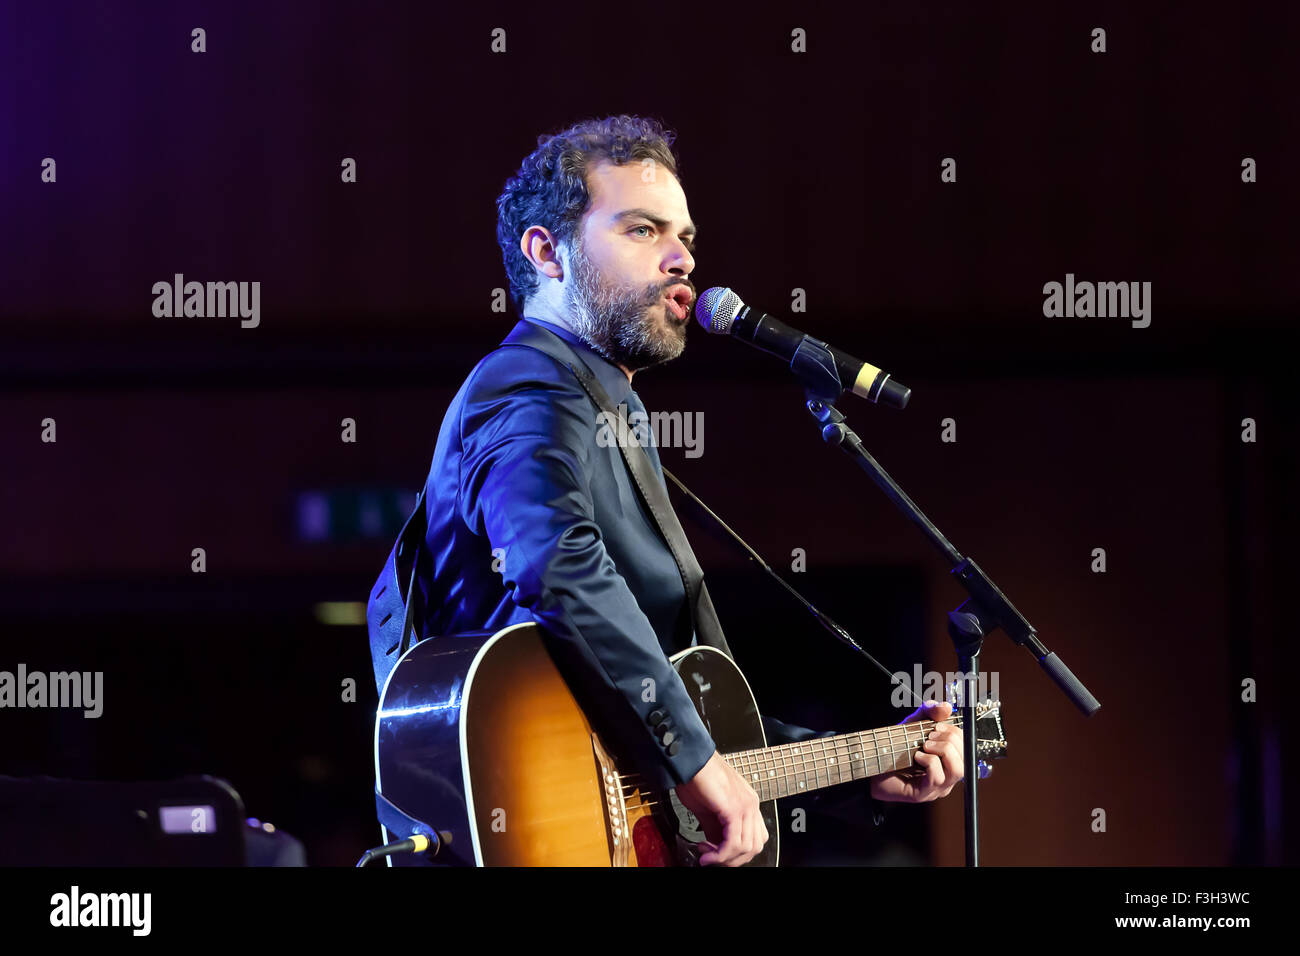 Rome, Italy - May 6, 2015: The comedian Andrea Perroni performs with his show of imitation during a concert by the Band of the S Stock Photo